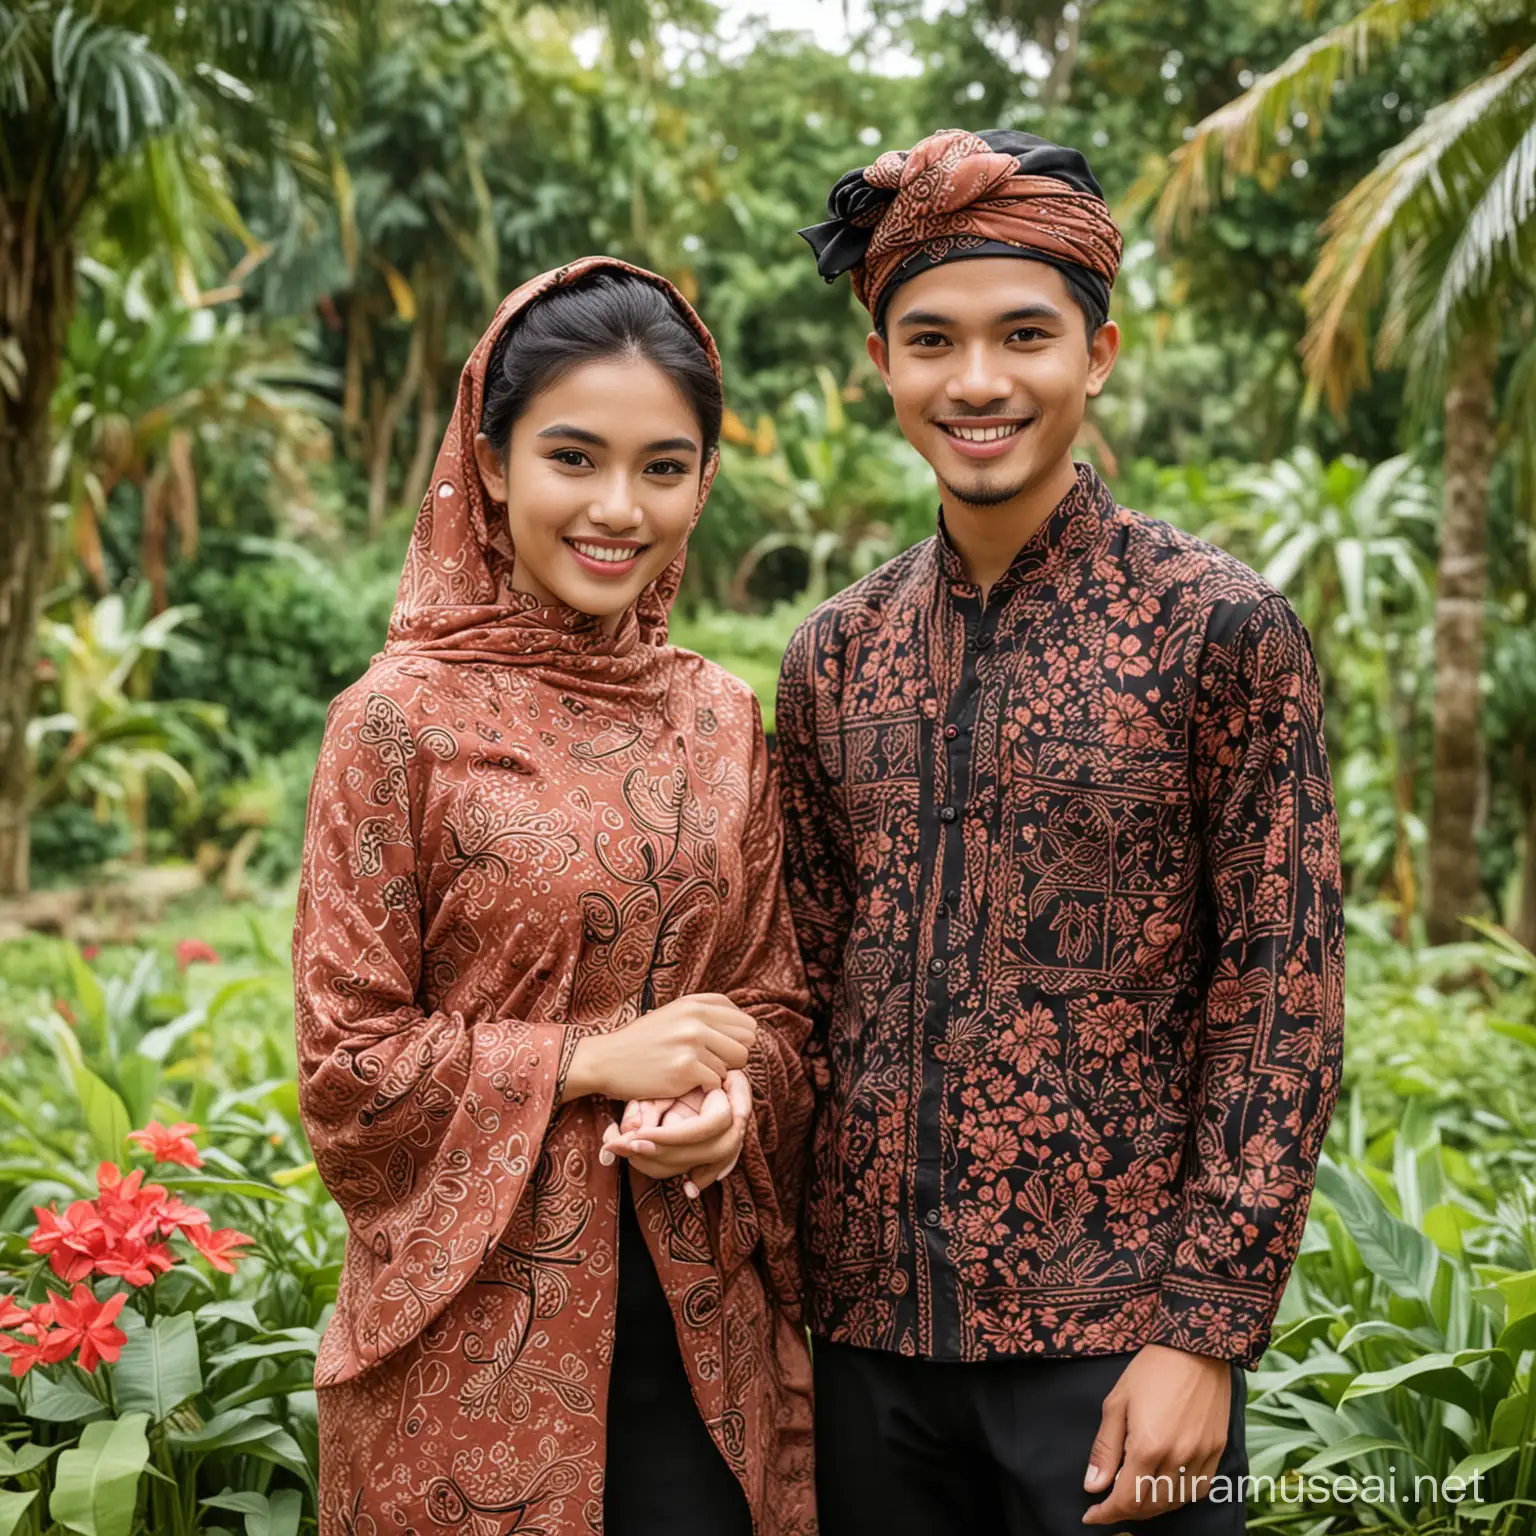 pre-wedding photo of a 19 year old Indonesian woman and man, the man is wearing typical Javanese batik and black trousers, the woman is wearing very beautiful make-up, wearing natural slightly reddish lipstick, wearing typical Javanese batik, wearing a headscarf and wearing a sarong, posing as if walking, and smiling, tea garden background.